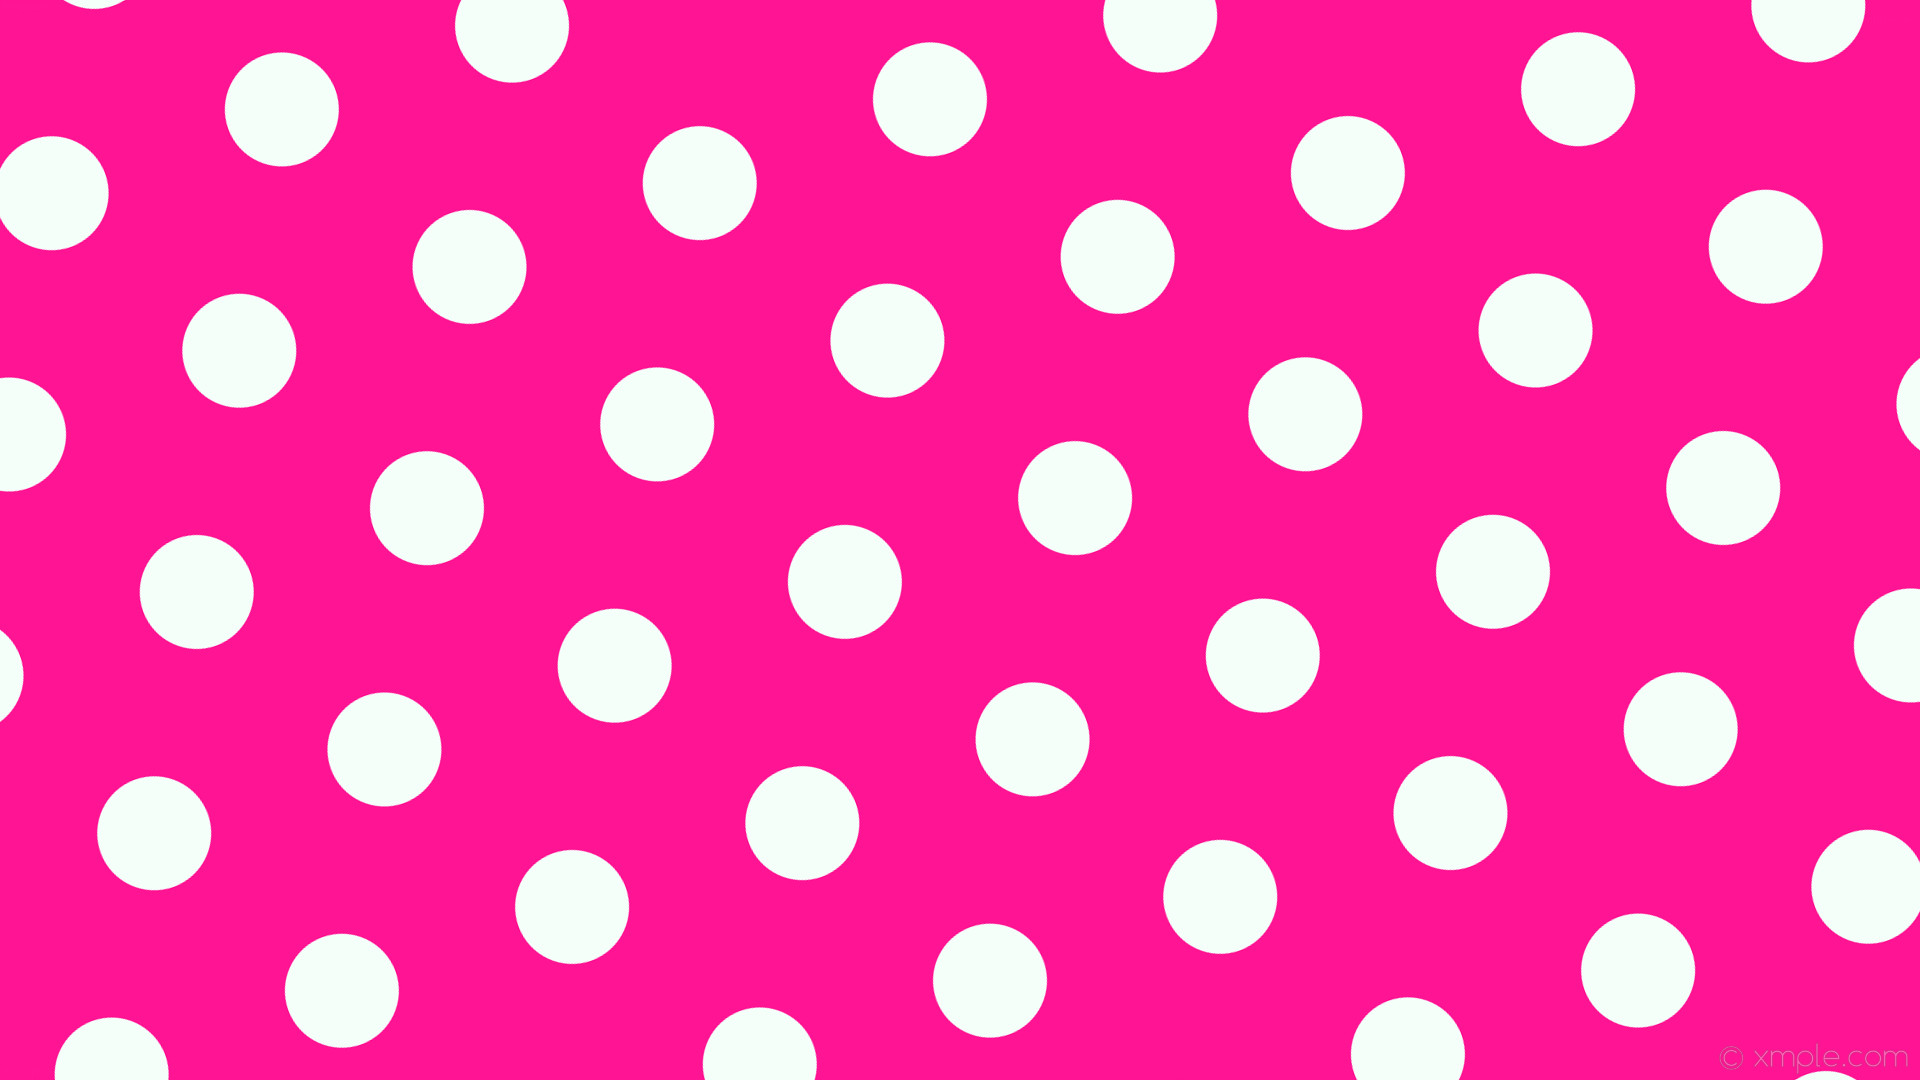 Black Base with Neon Polka Dots - wide 5